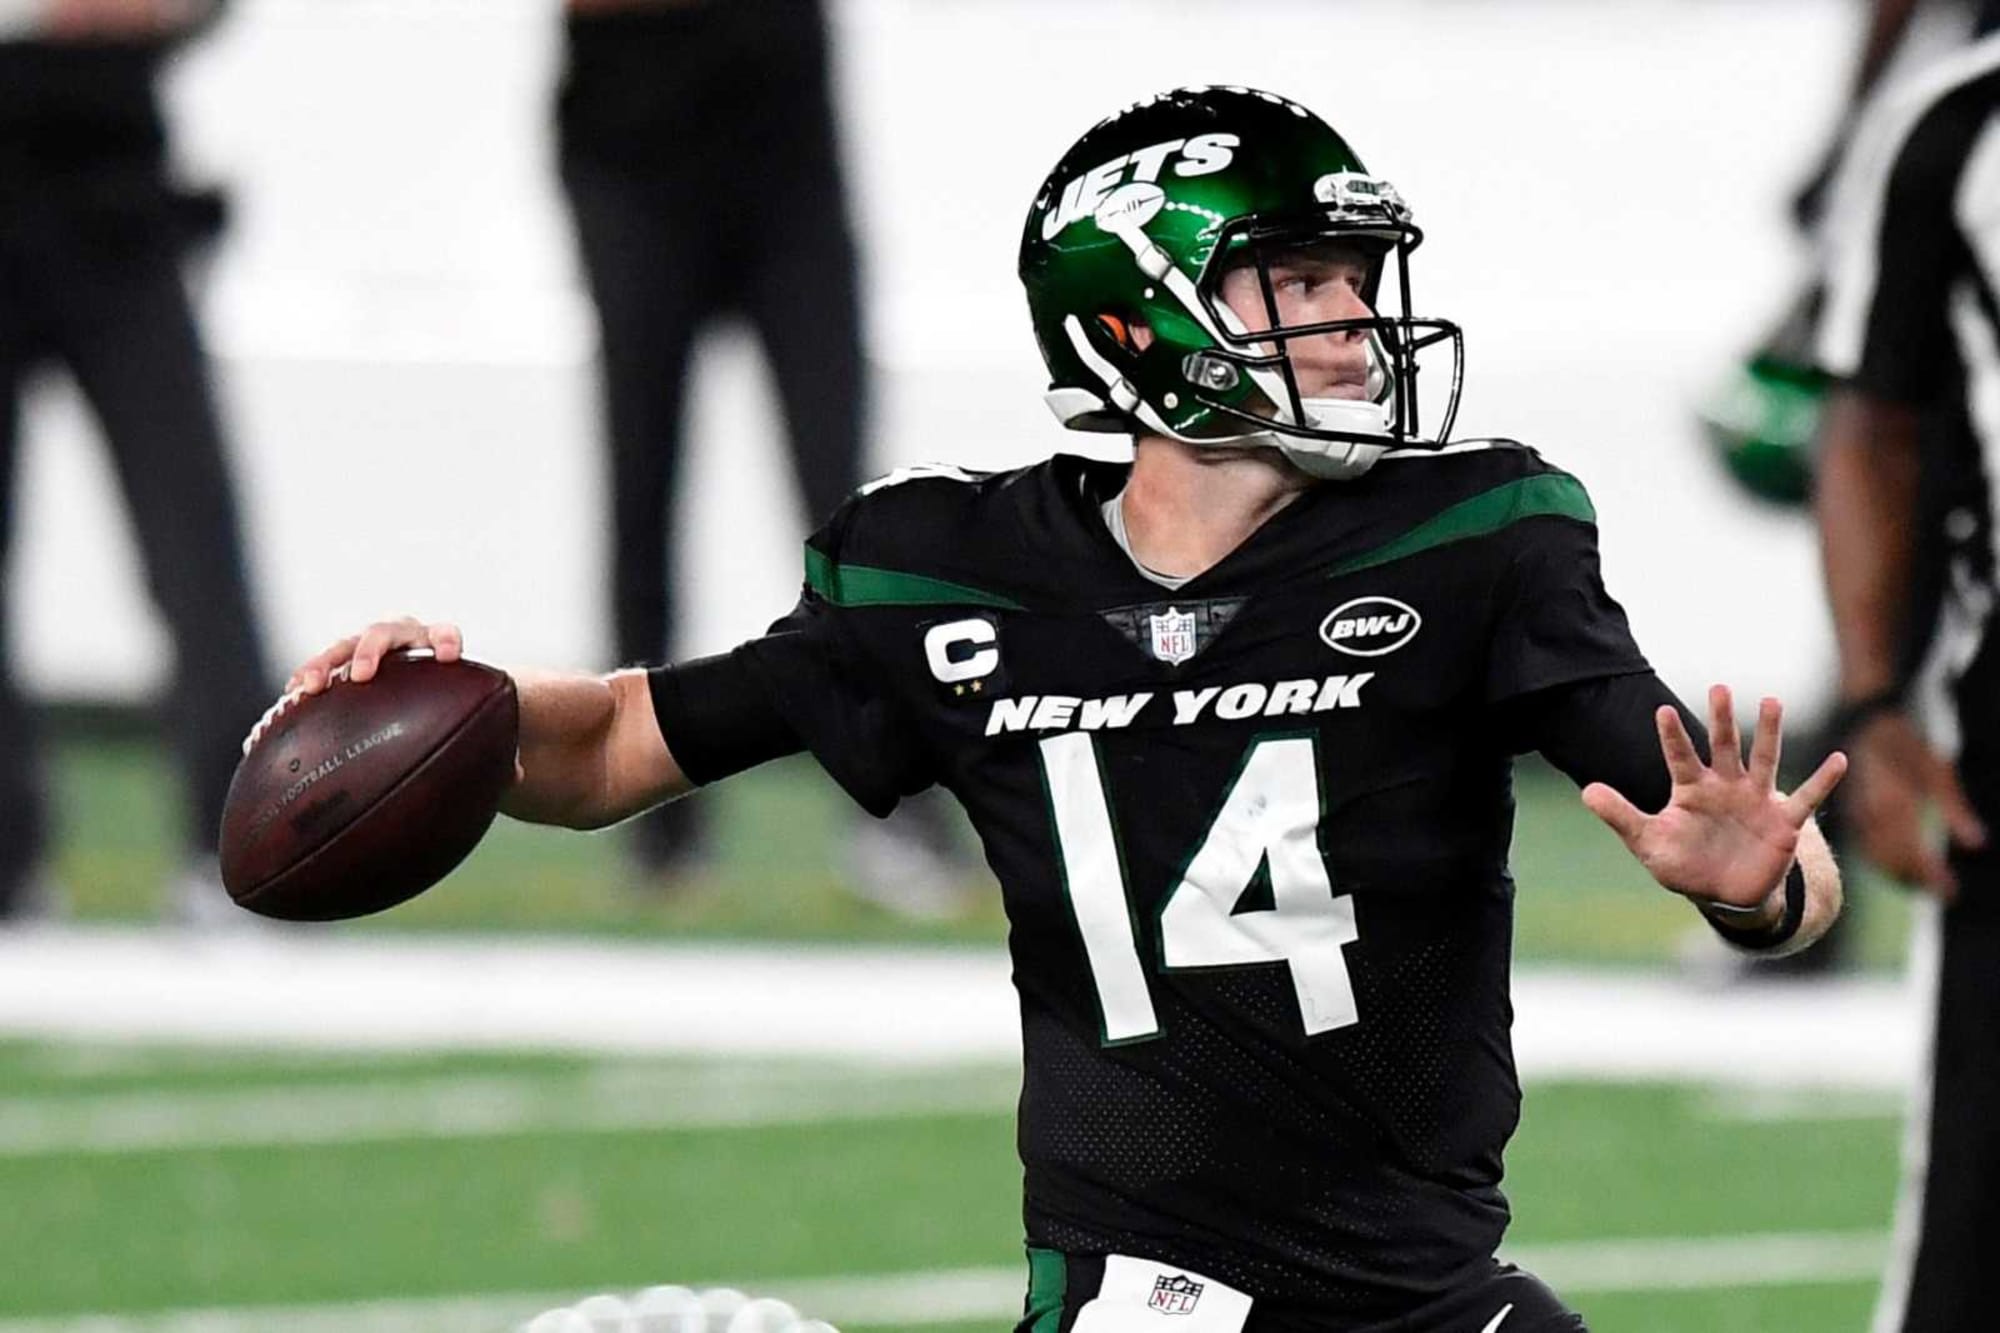 49ers: Sam Darnold to Panthers confirms key question for NFL Draft